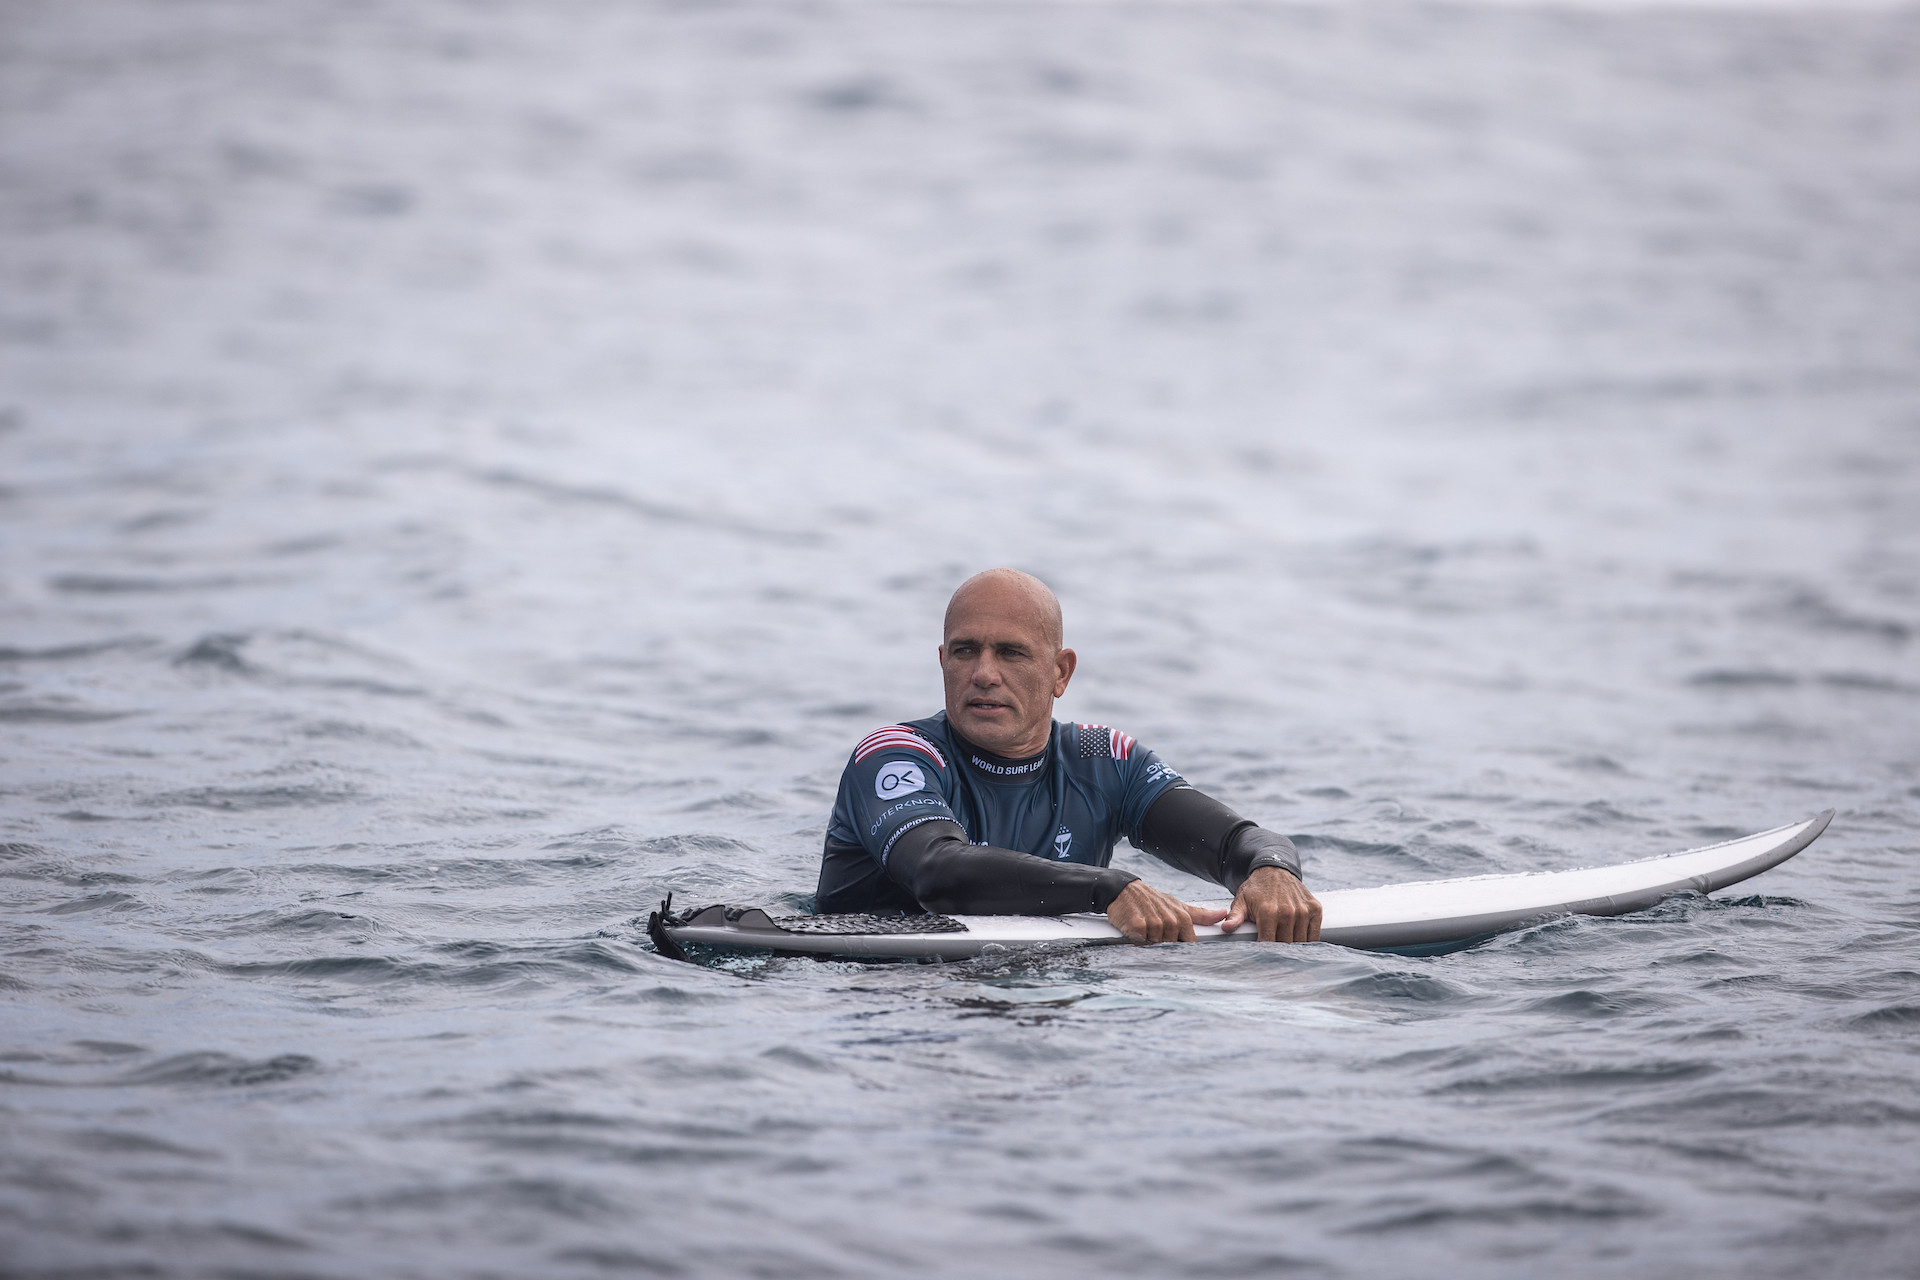 USA's Kelly Slater after losing his round of 16 heat on 15 August 2023 in Teahupo'o. GETTY IMAGES. GETTY IMAGES